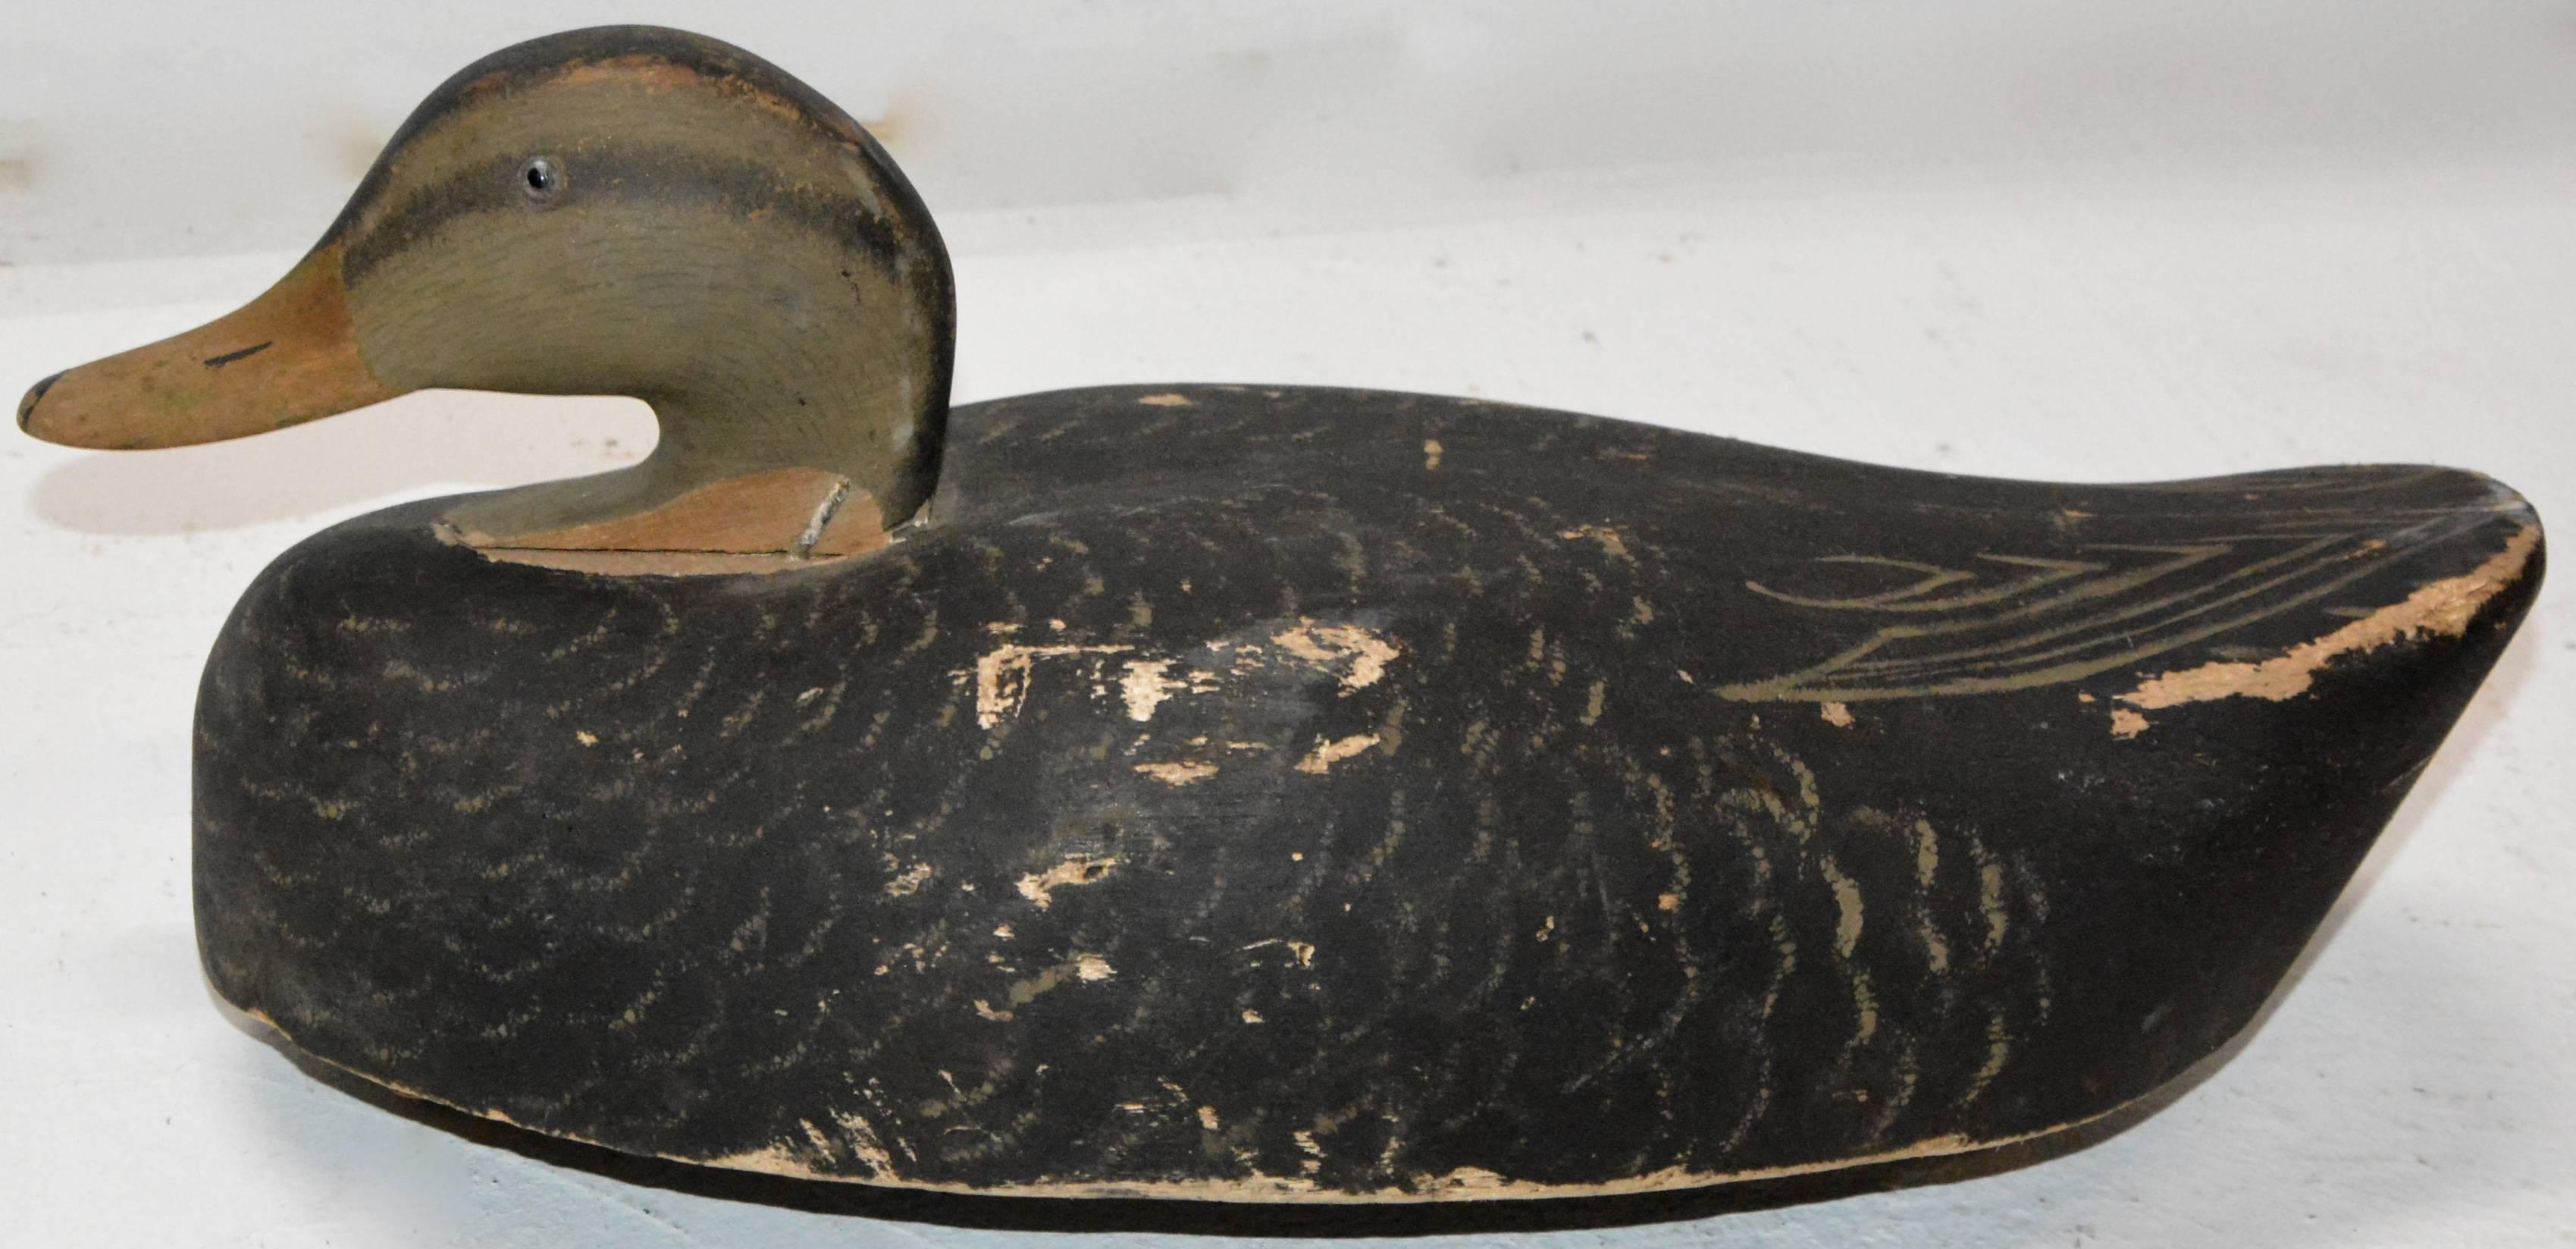 Lead Antique Duck Decoy with Weight and Distressed Paint